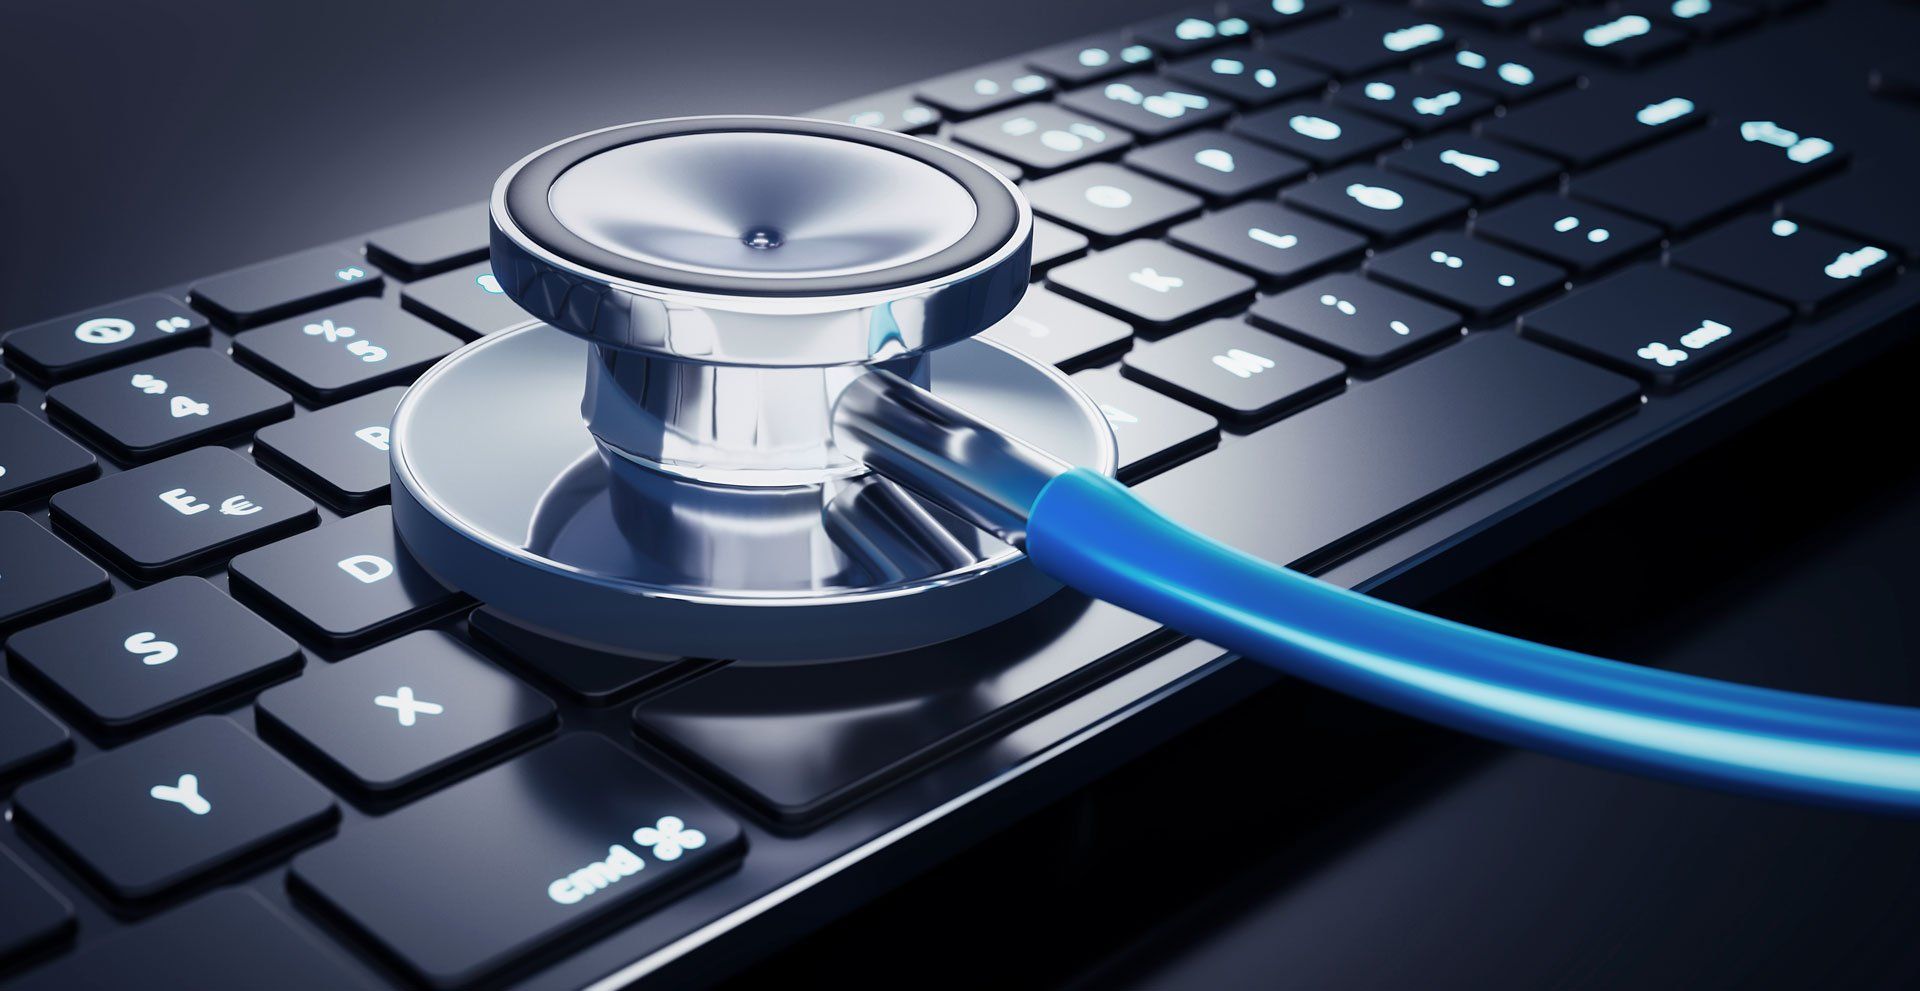 Governments are doubling down on health cybersecurity